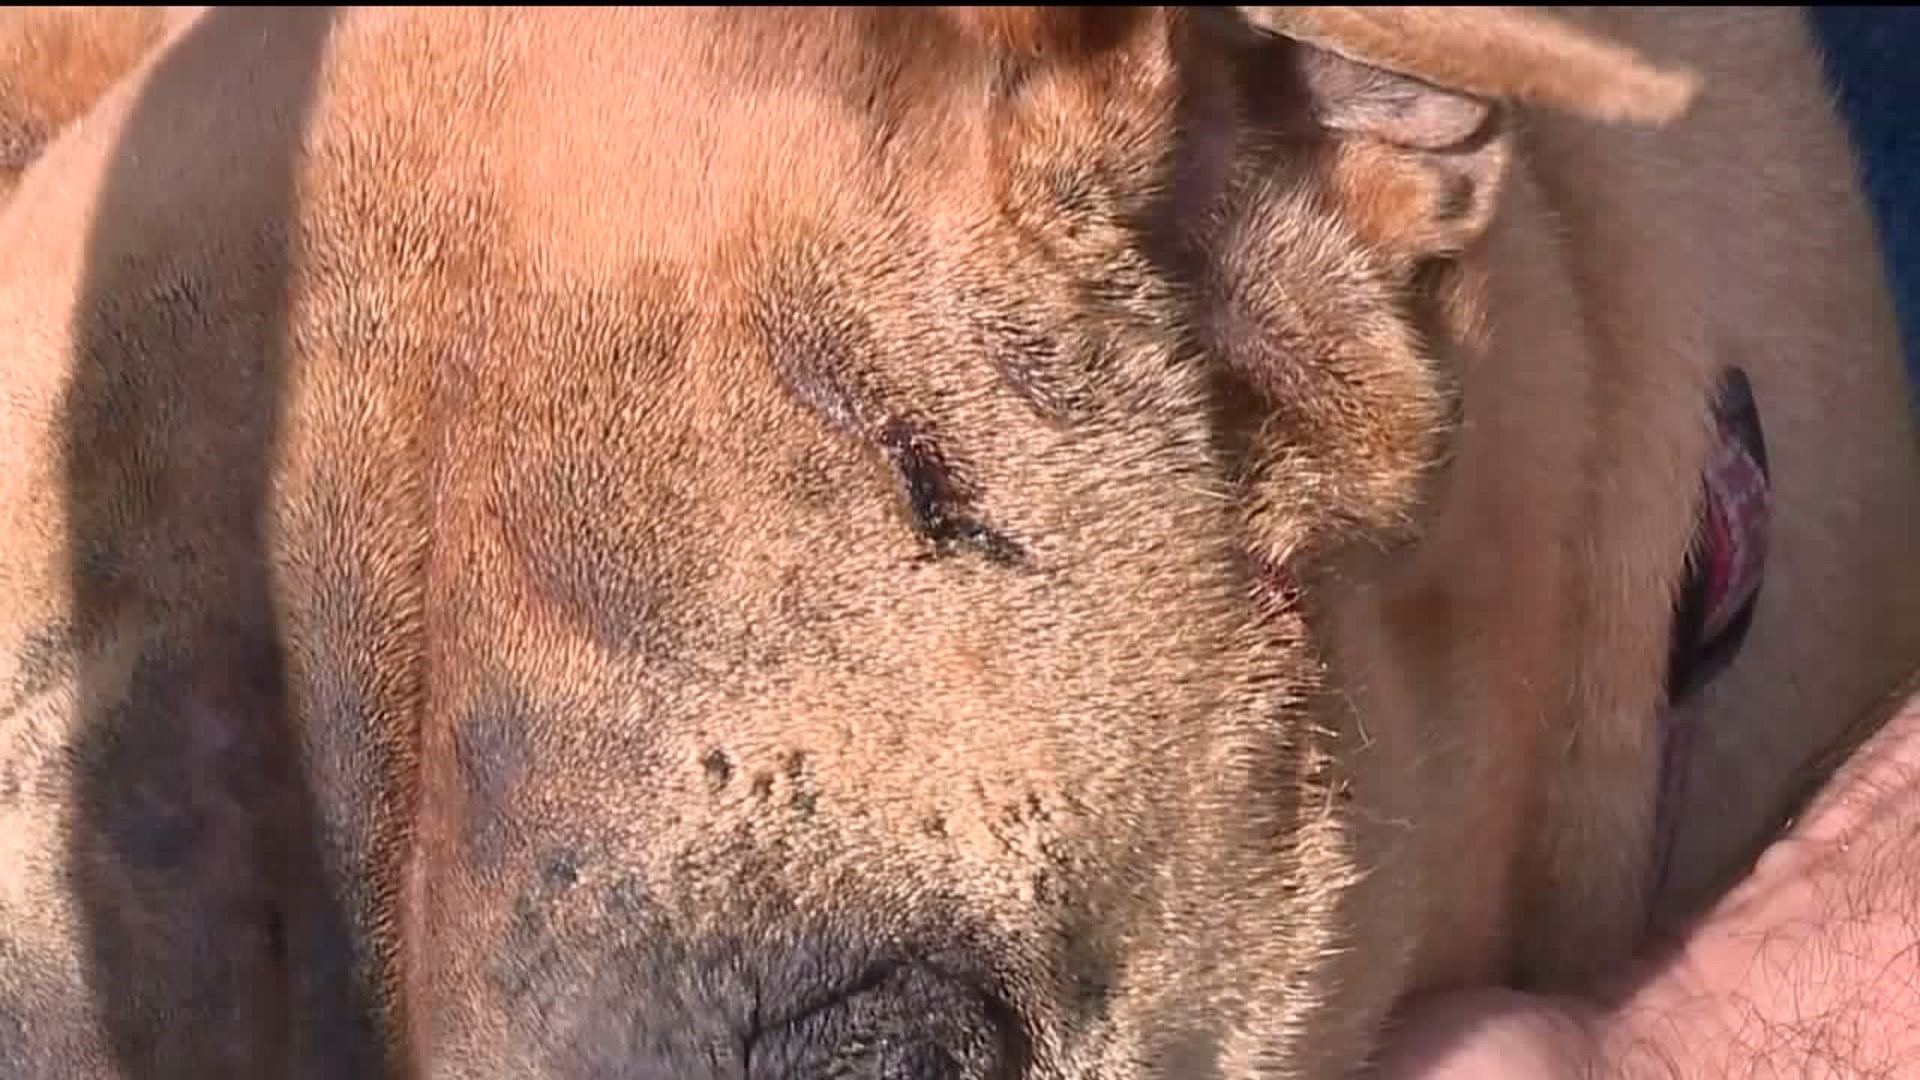 Bear Attack Concerns Dog Owners in Montgomery